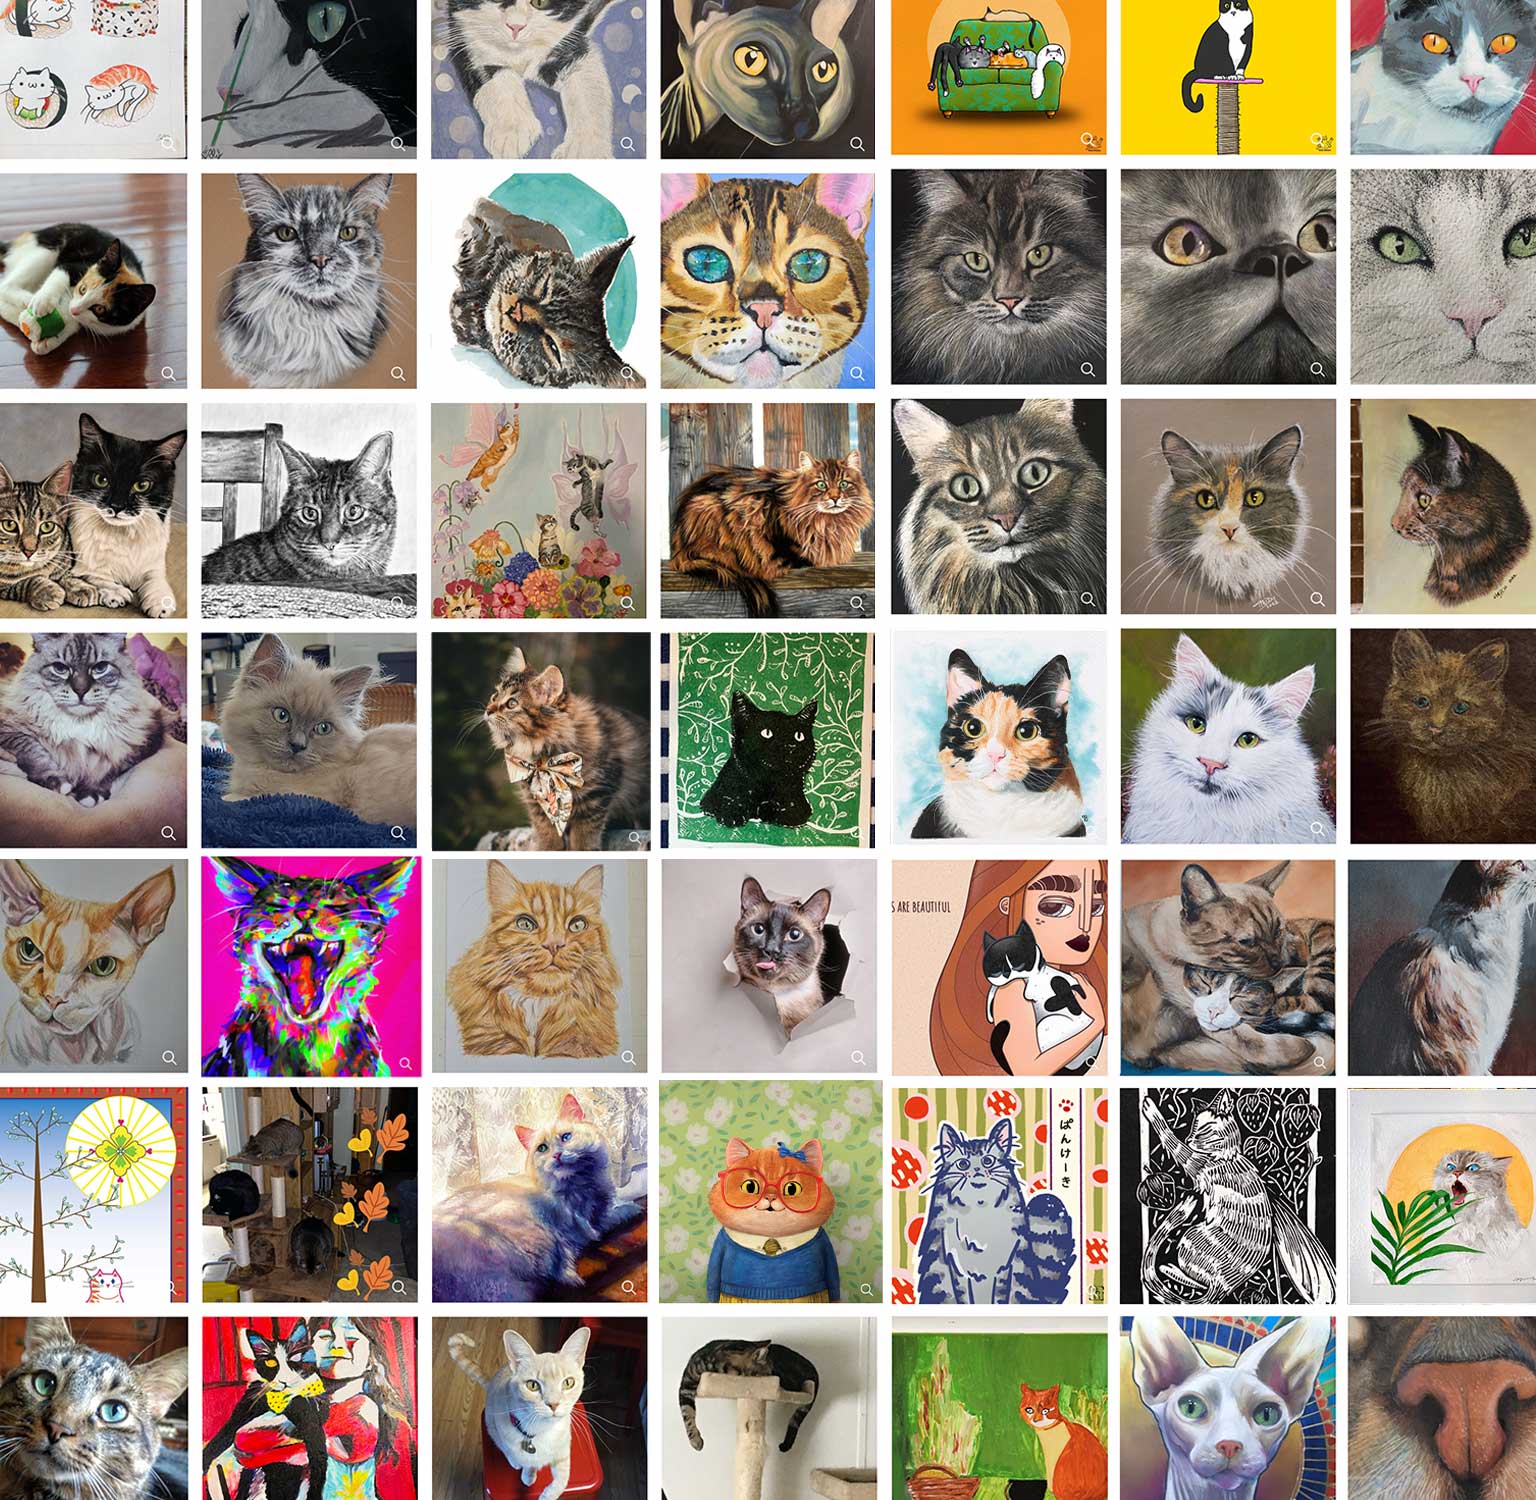 artworks that participated in the Catit Art Contest